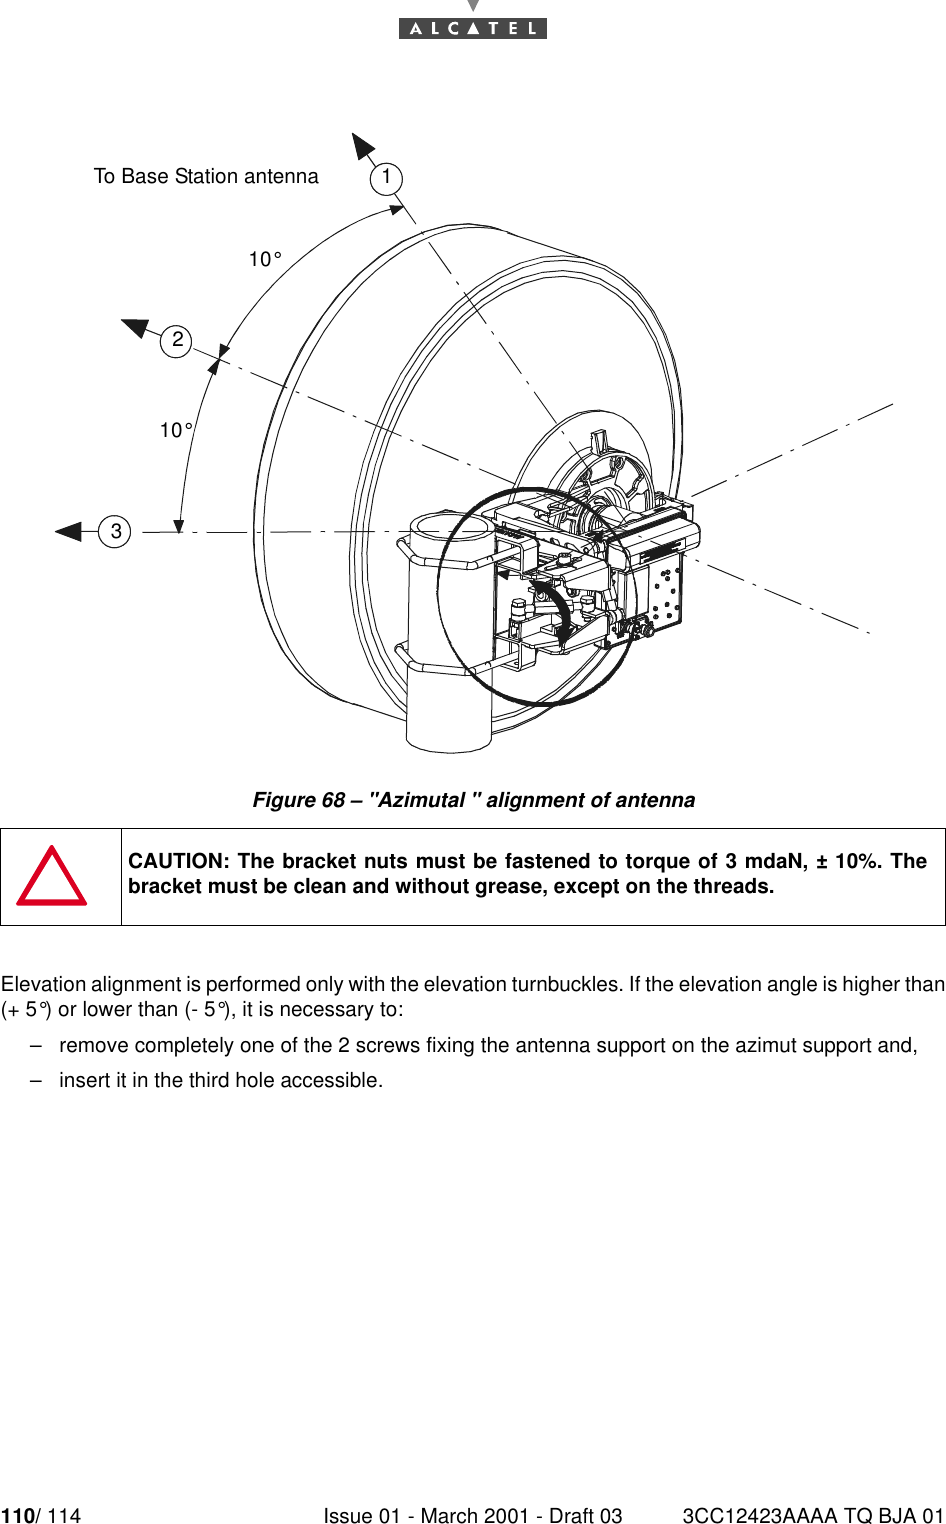 110/ 114 Issue 01 - March 2001 - Draft 03 3CC12423AAAA TQ BJA 01112Figure 68 – &quot;Azimutal &quot; alignment of antennaElevation alignment is performed only with the elevation turnbuckles. If the elevation angle is higher than(+ 5°) or lower than (- 5°), it is necessary to:–remove completely one of the 2 screws fixing the antenna support on the azimut support and,–insert it in the third hole accessible.CAUTION: The bracket nuts must be fastened to torque of 3 mdaN, ± 10%. Thebracket must be clean and without grease, except on the threads.10°123To Base Station antenna10°